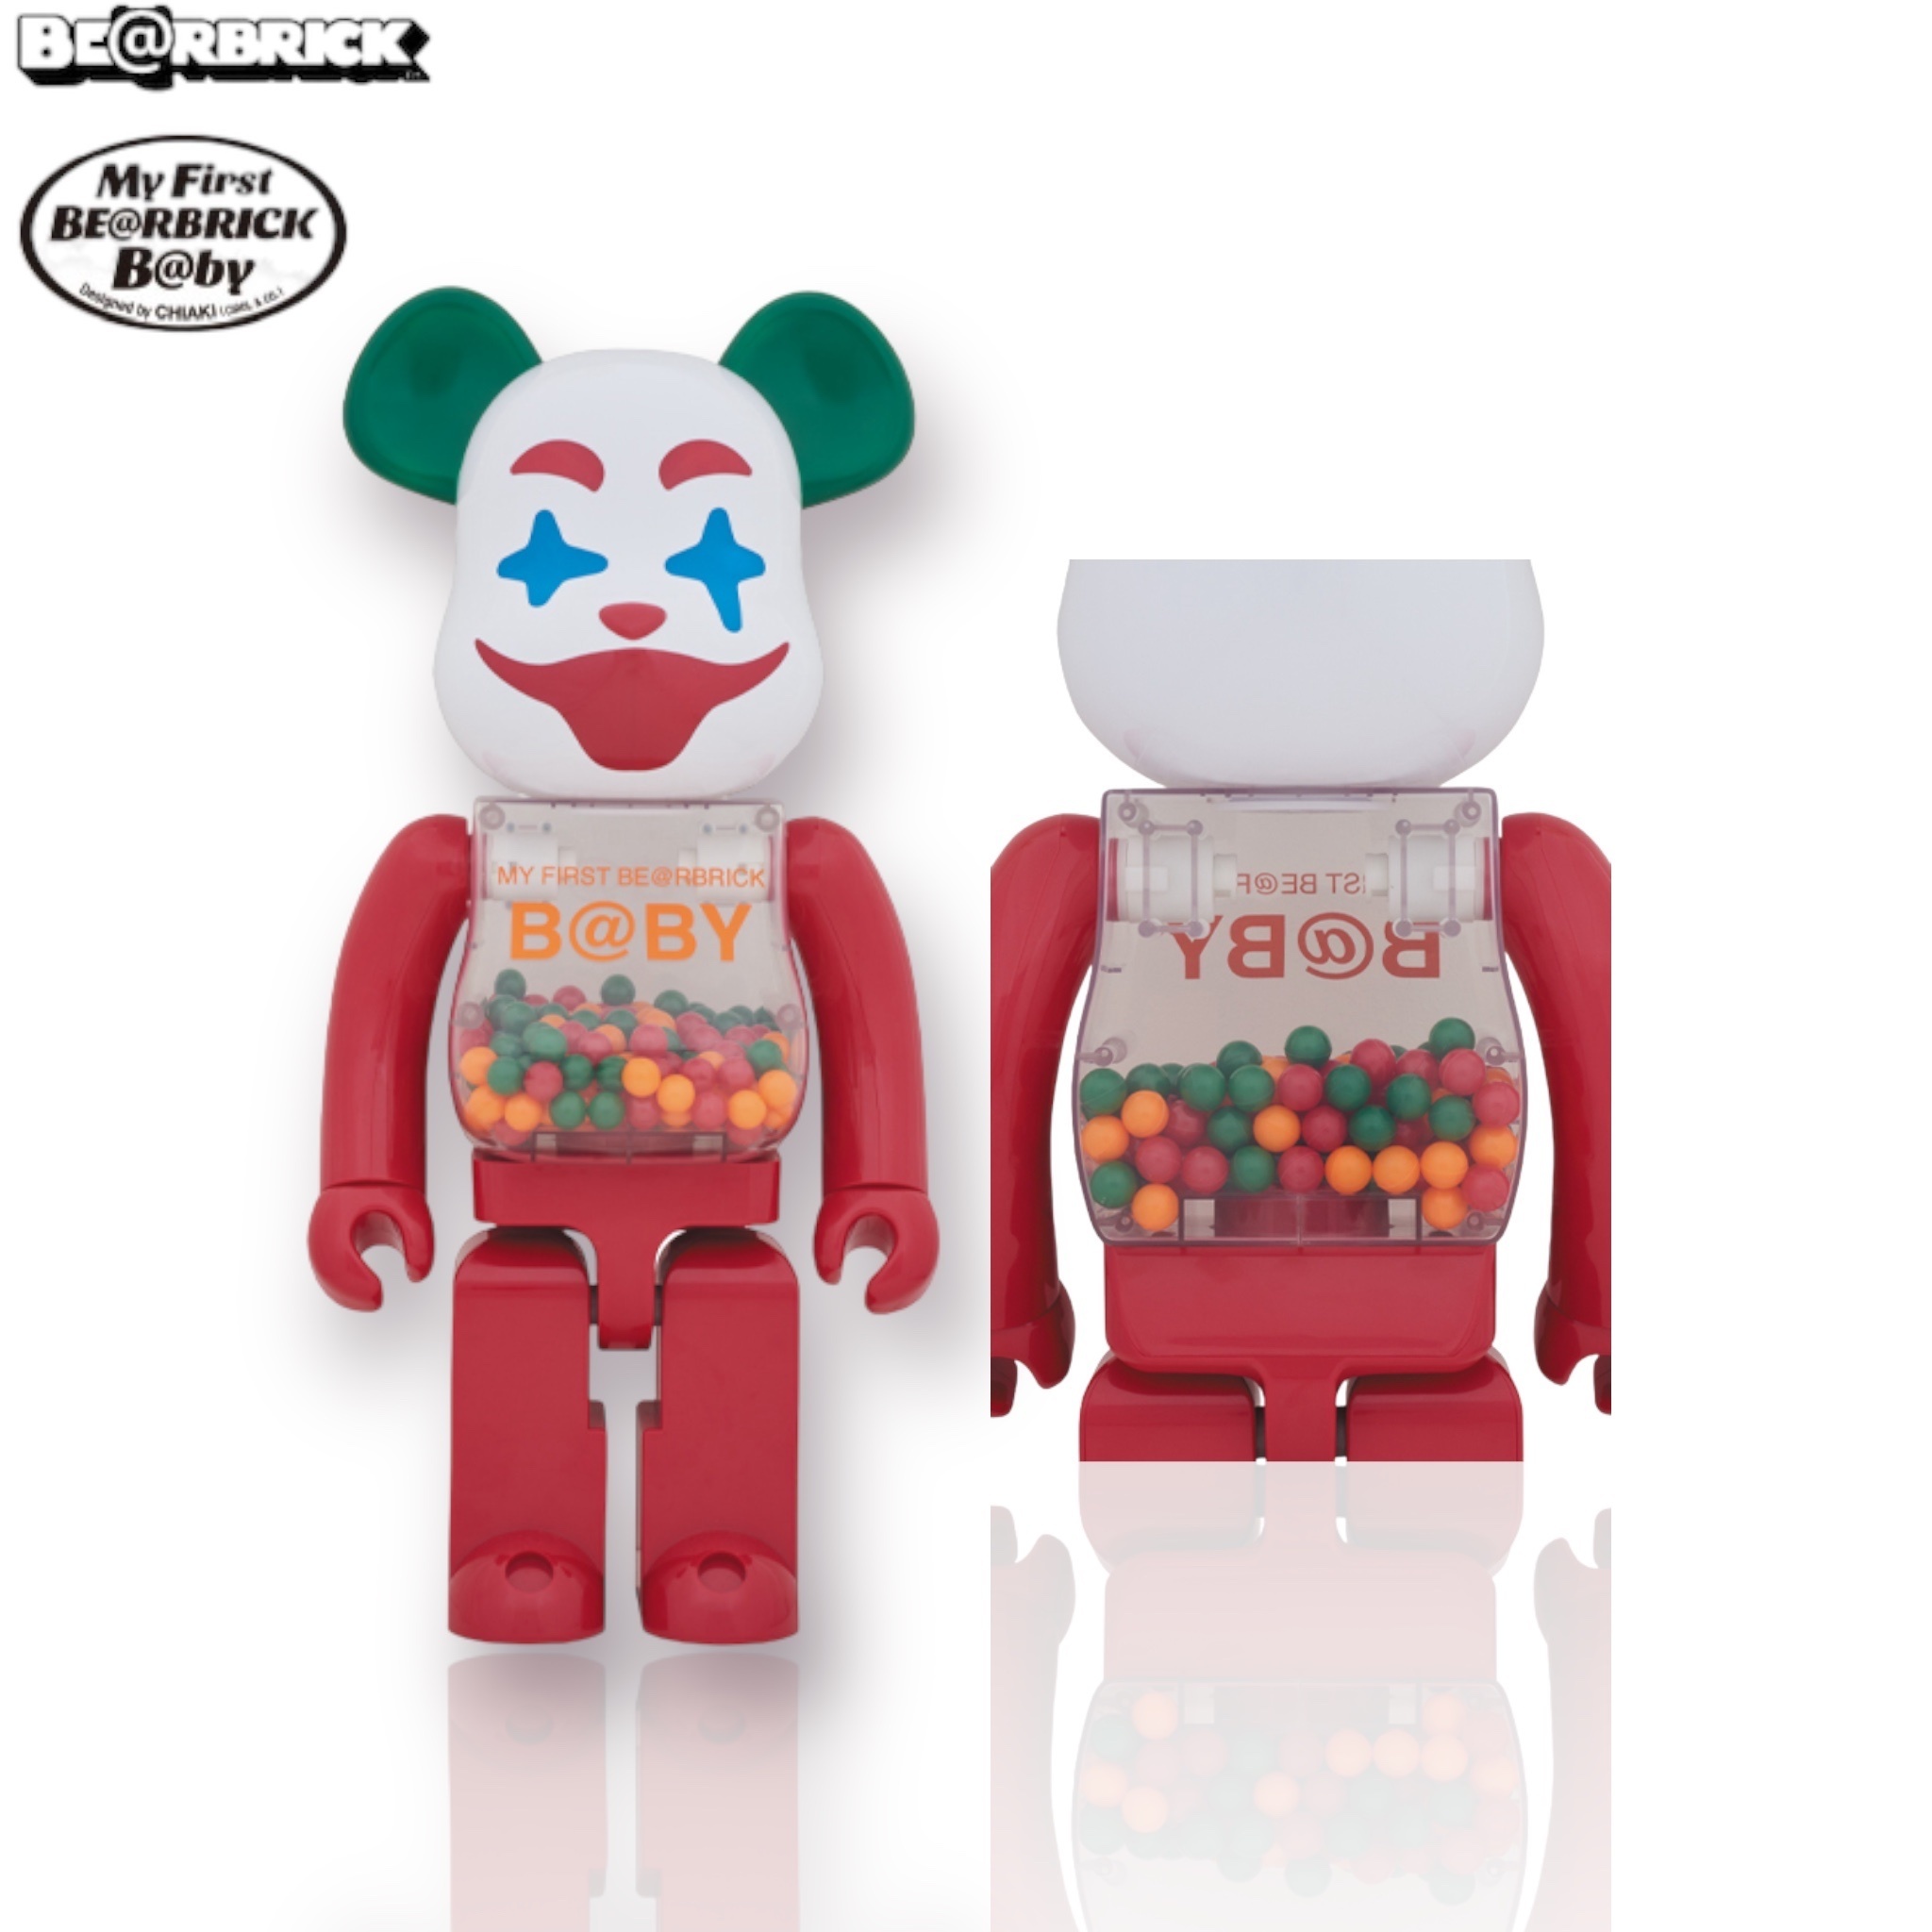 MY FIRST BE@RBRICK B@BY Jester Verエンタメ/ホビー